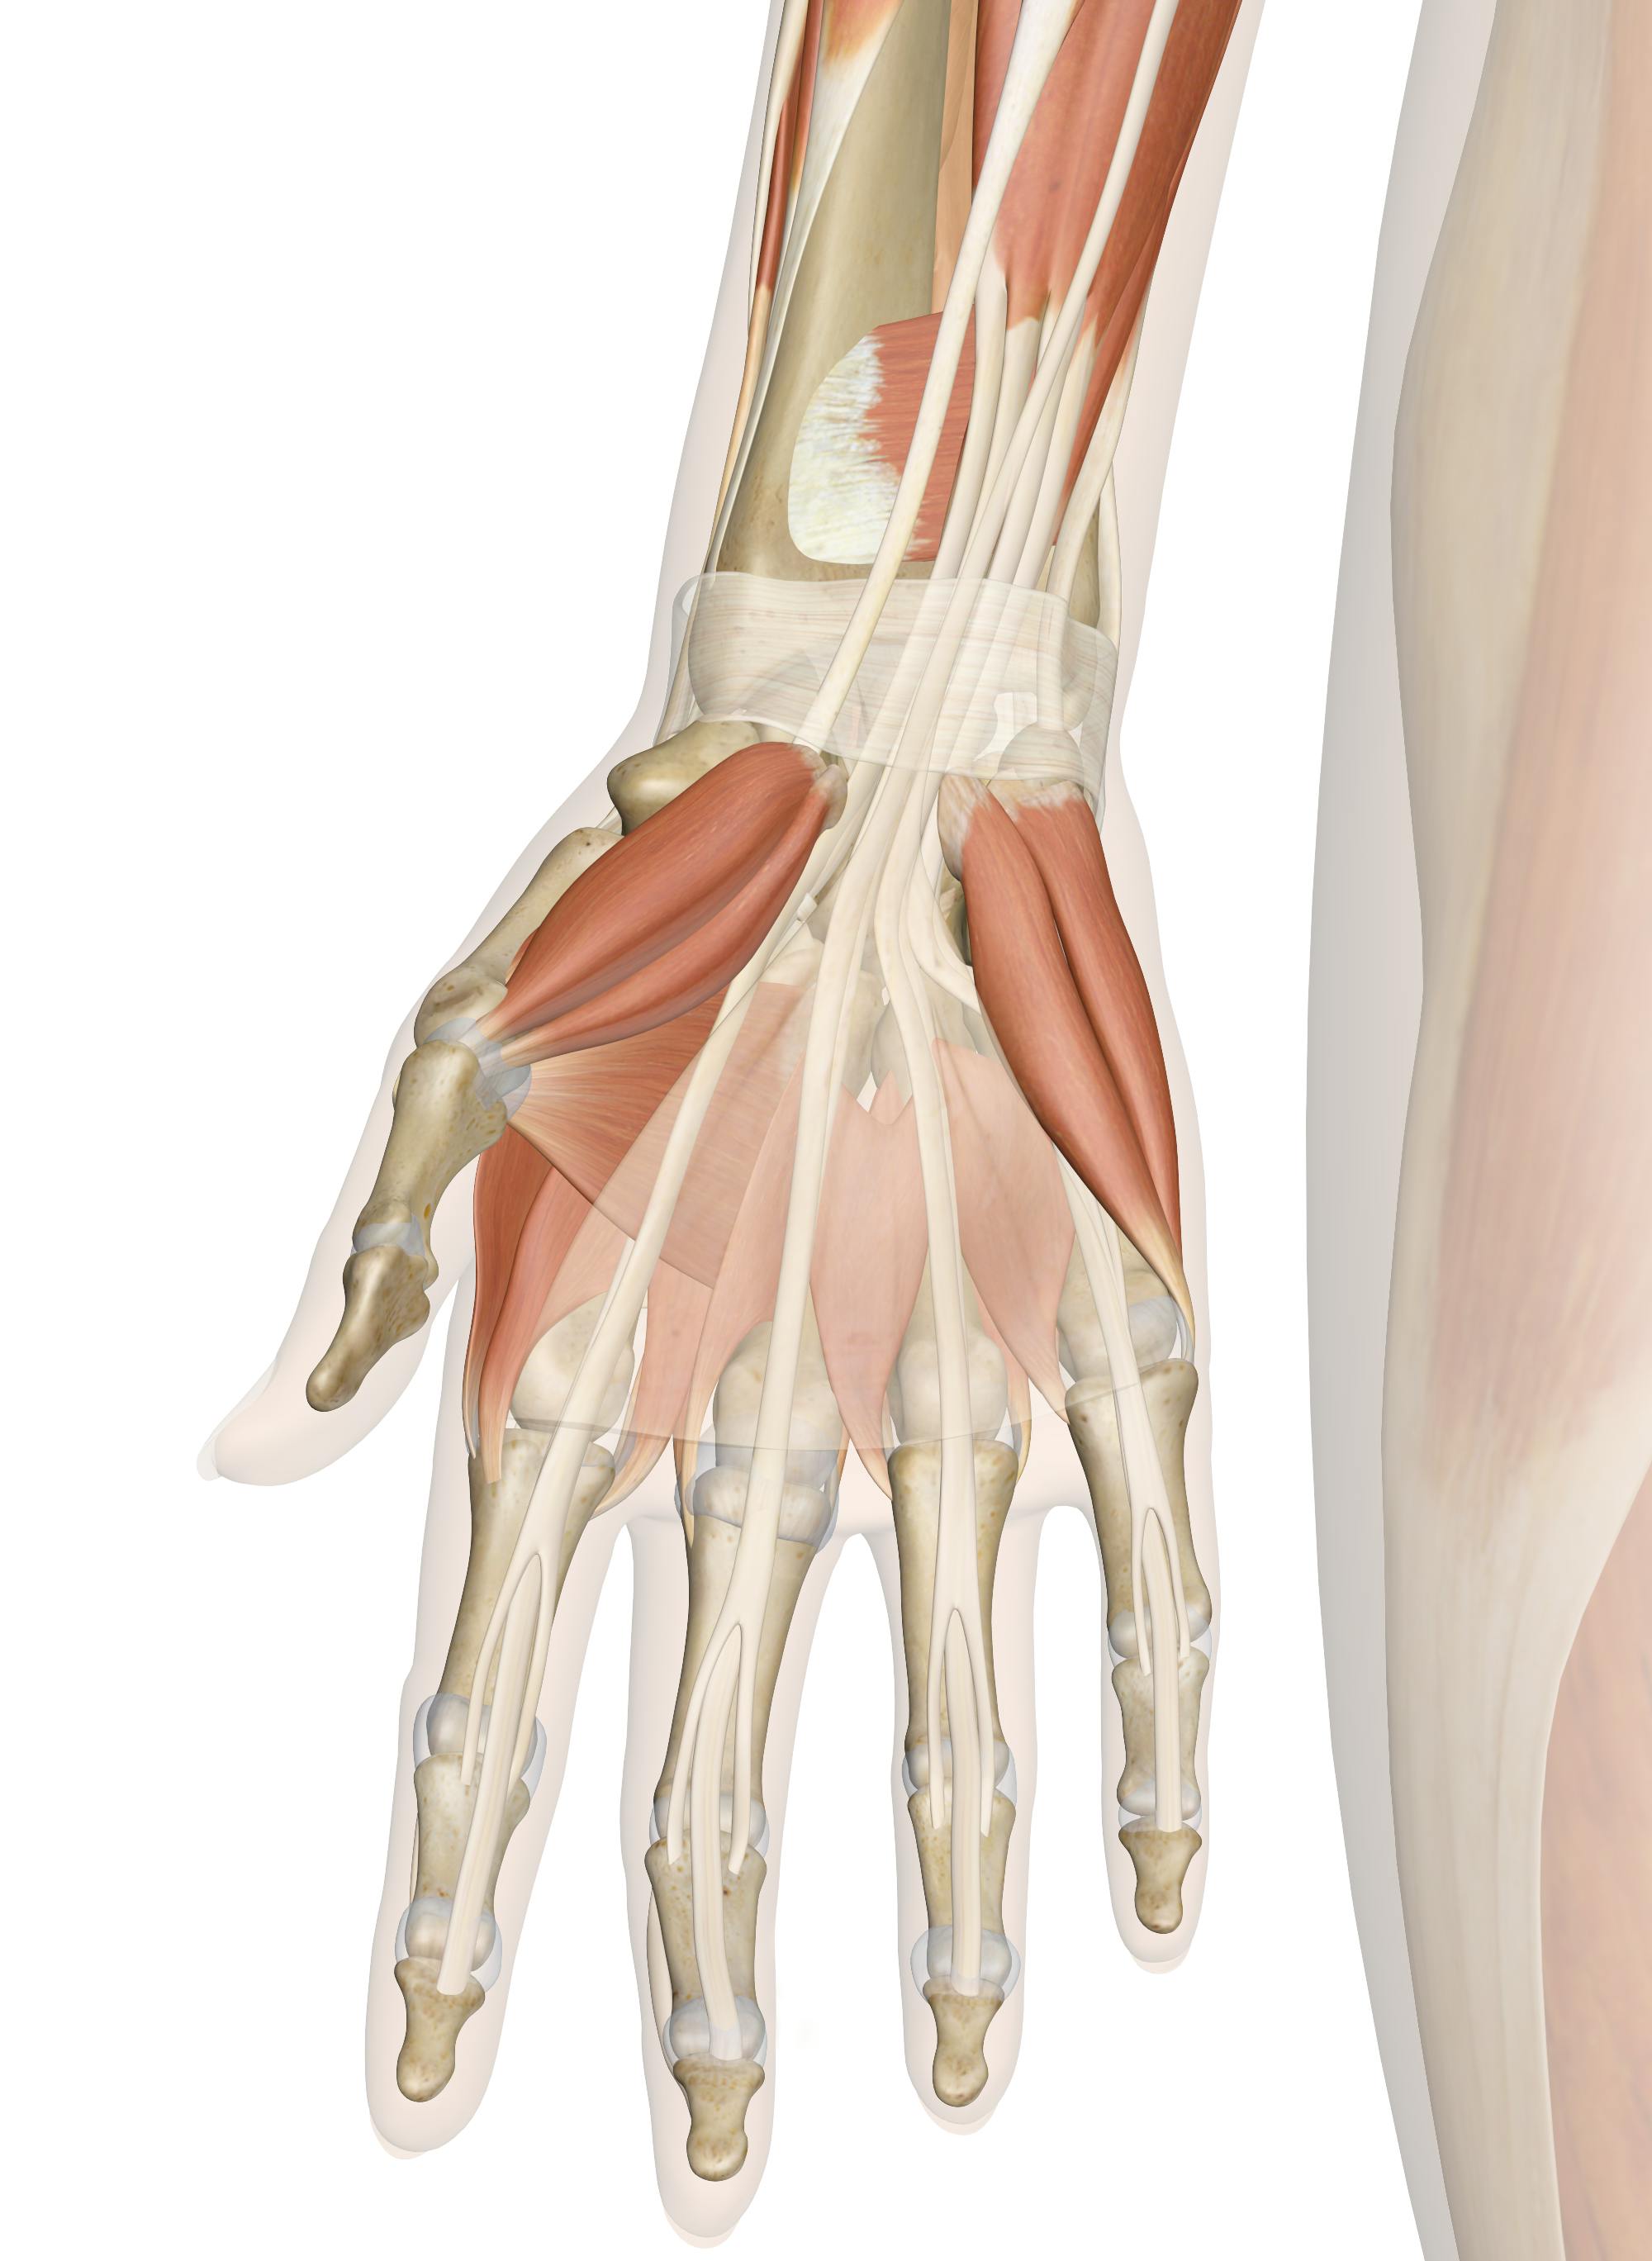 The Muscles Of The Hand Anatomy And 3d Illustrations